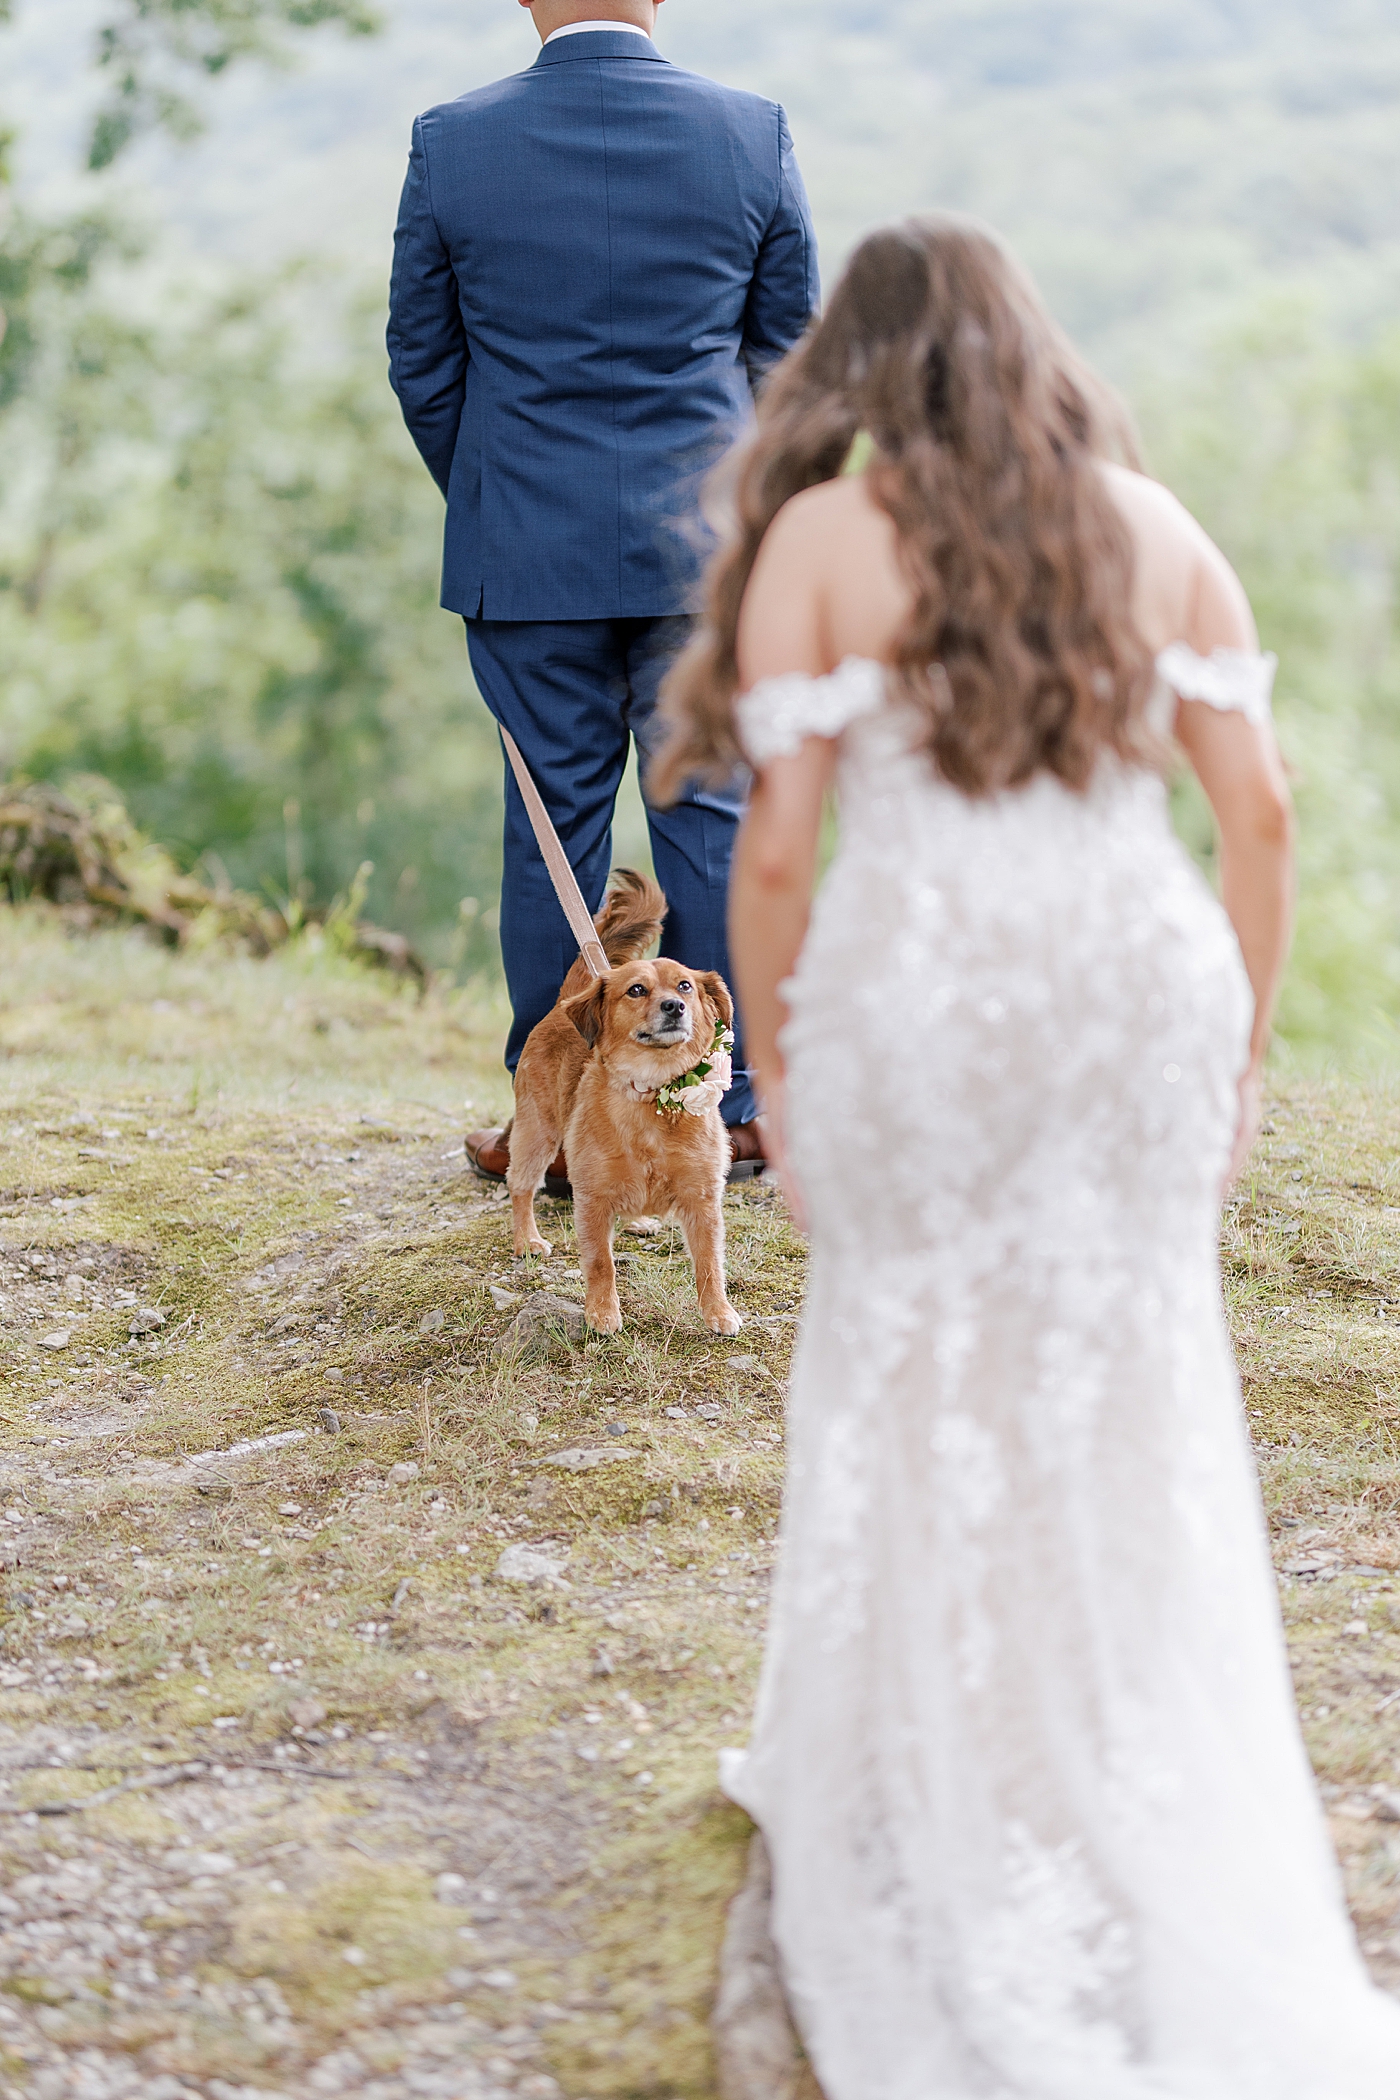 Bride walking to groom and dog during first look | Image by Hope Helmuth Photography 